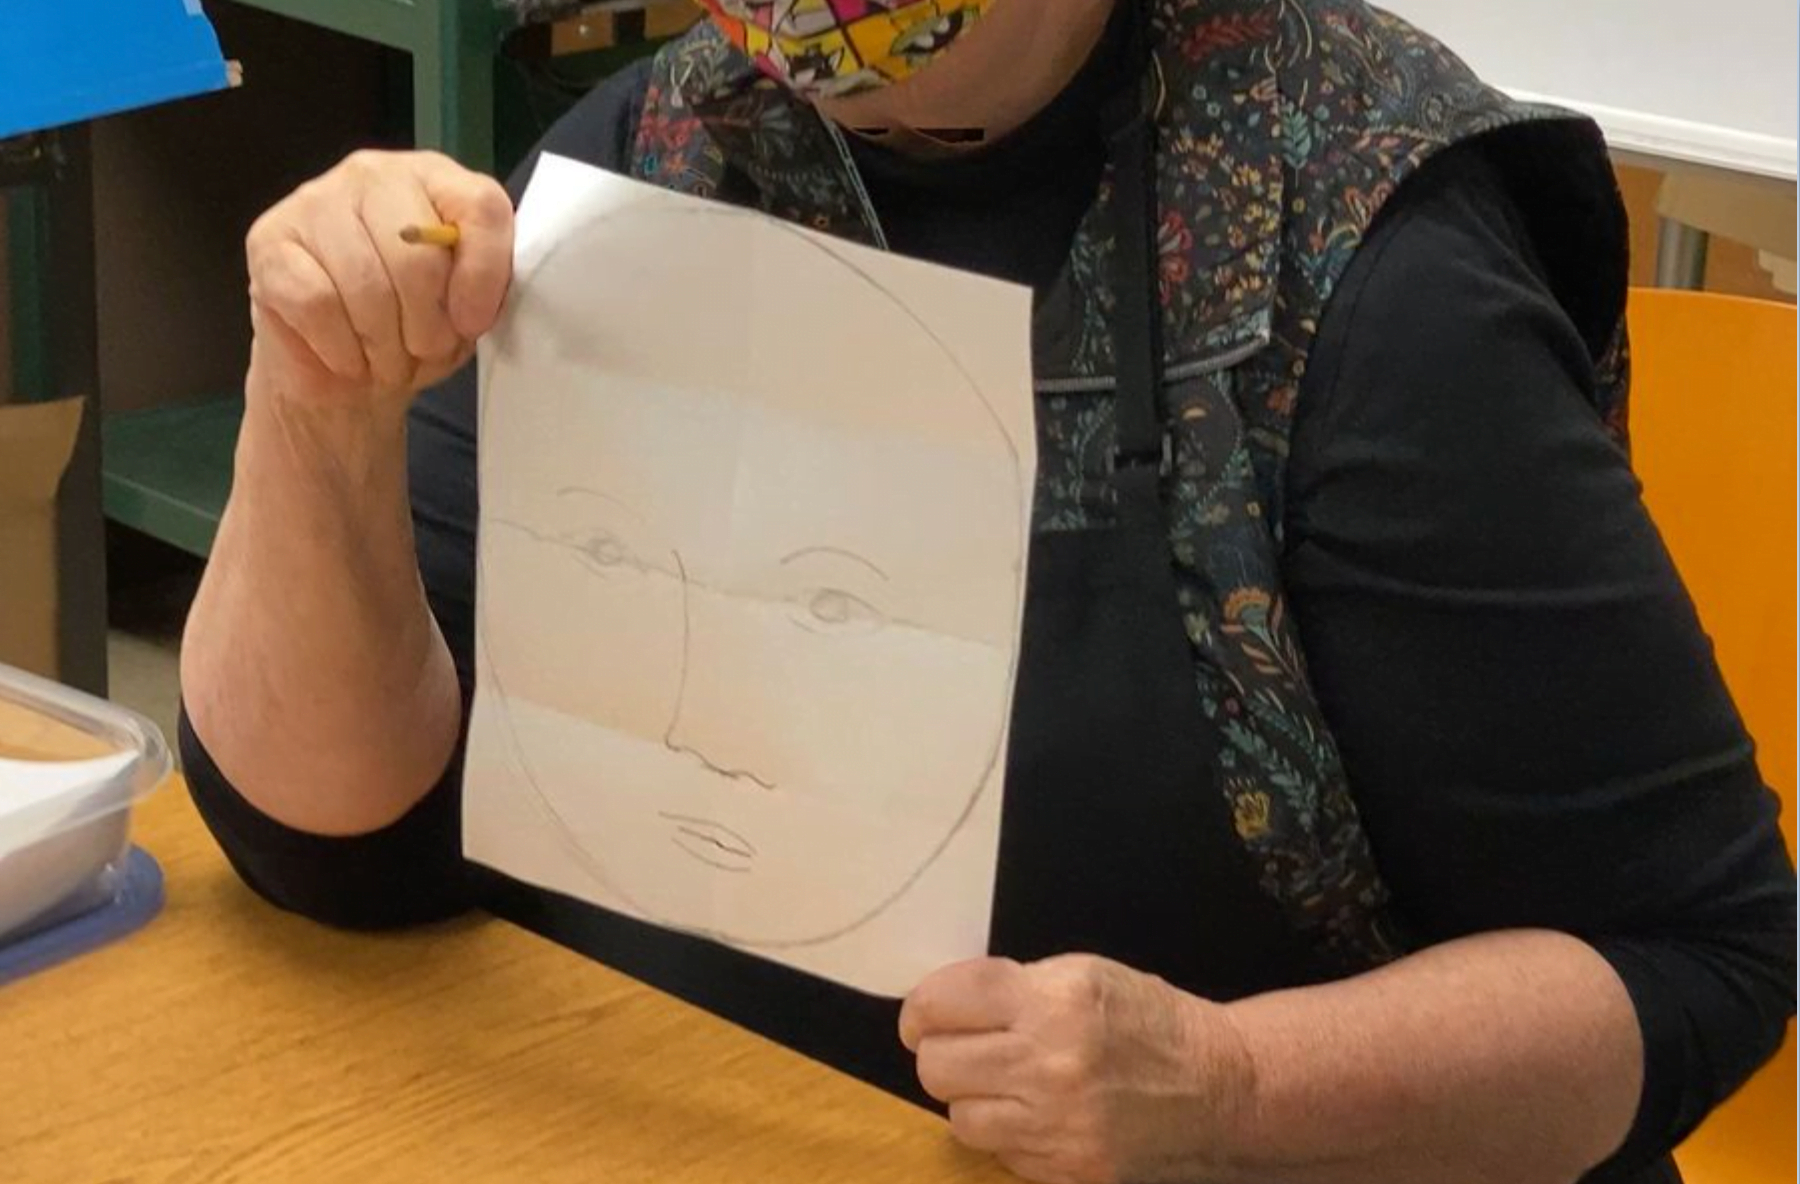 Face drawing tutorial at elementary school in Hillsboro